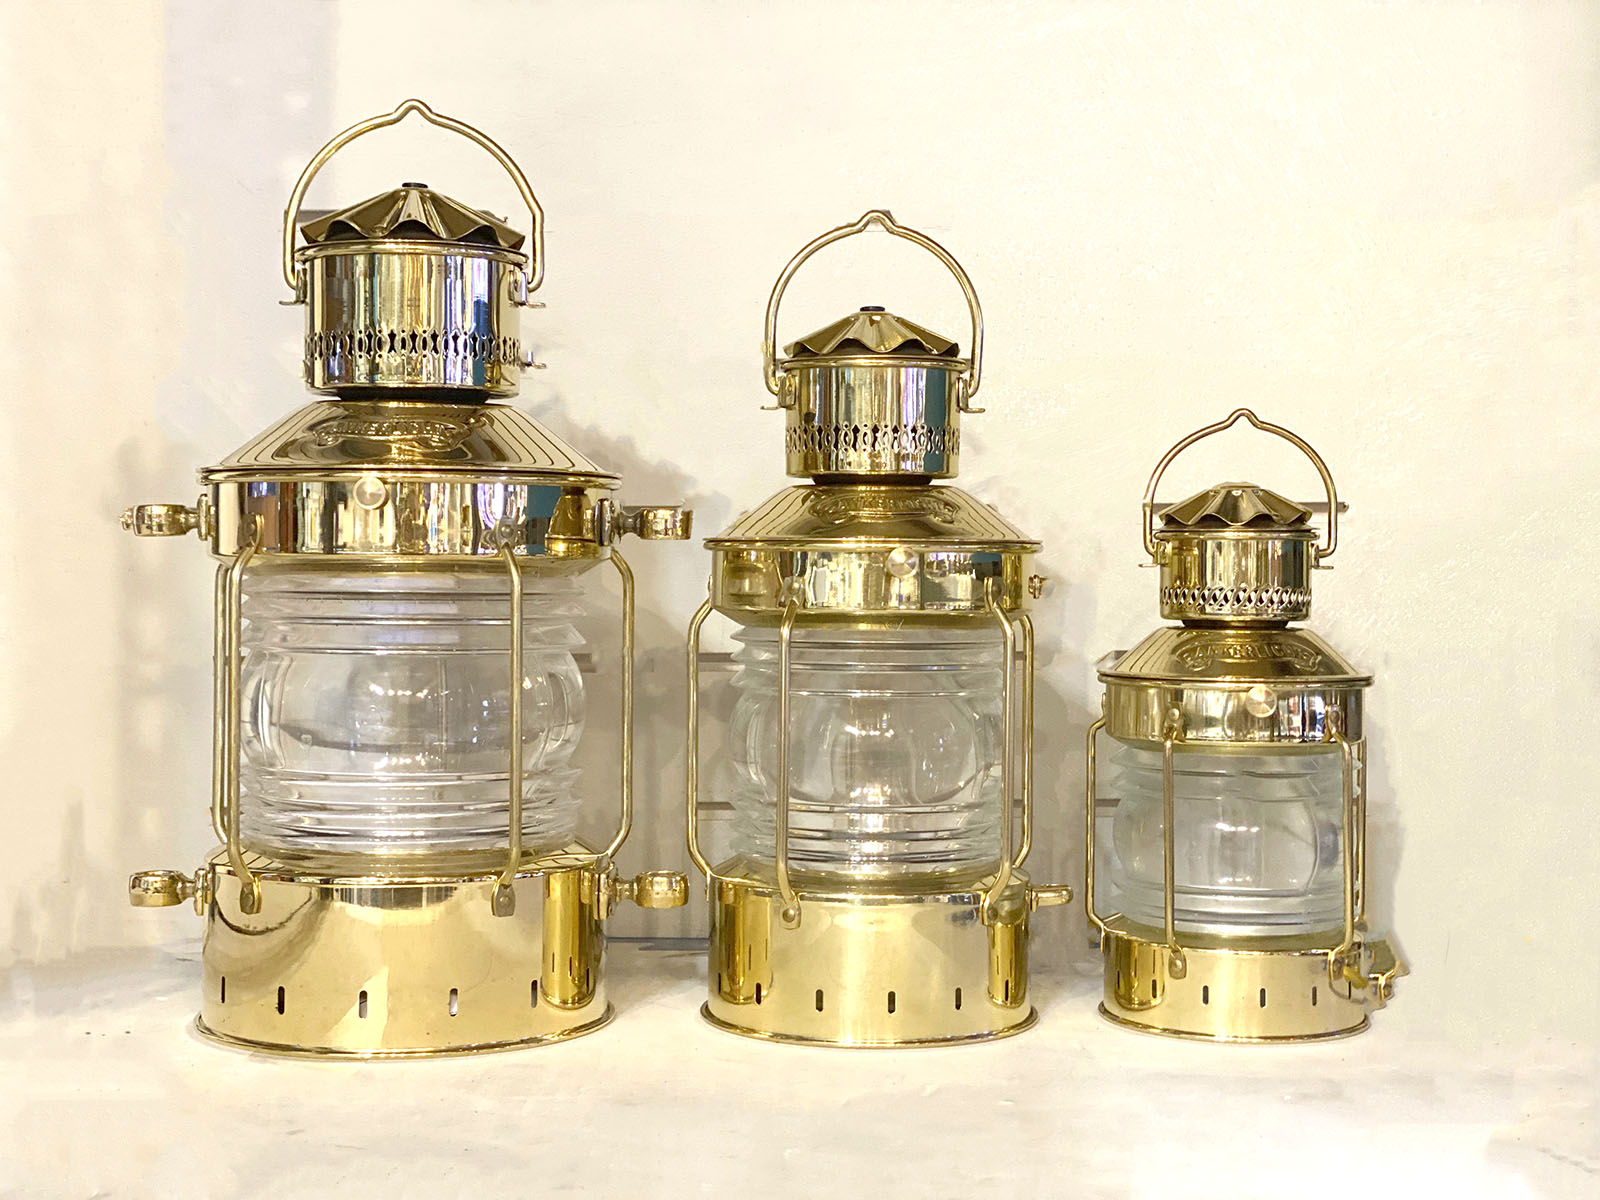 Mini Nautical Brass & Frosted Glass Ceiling Lantern